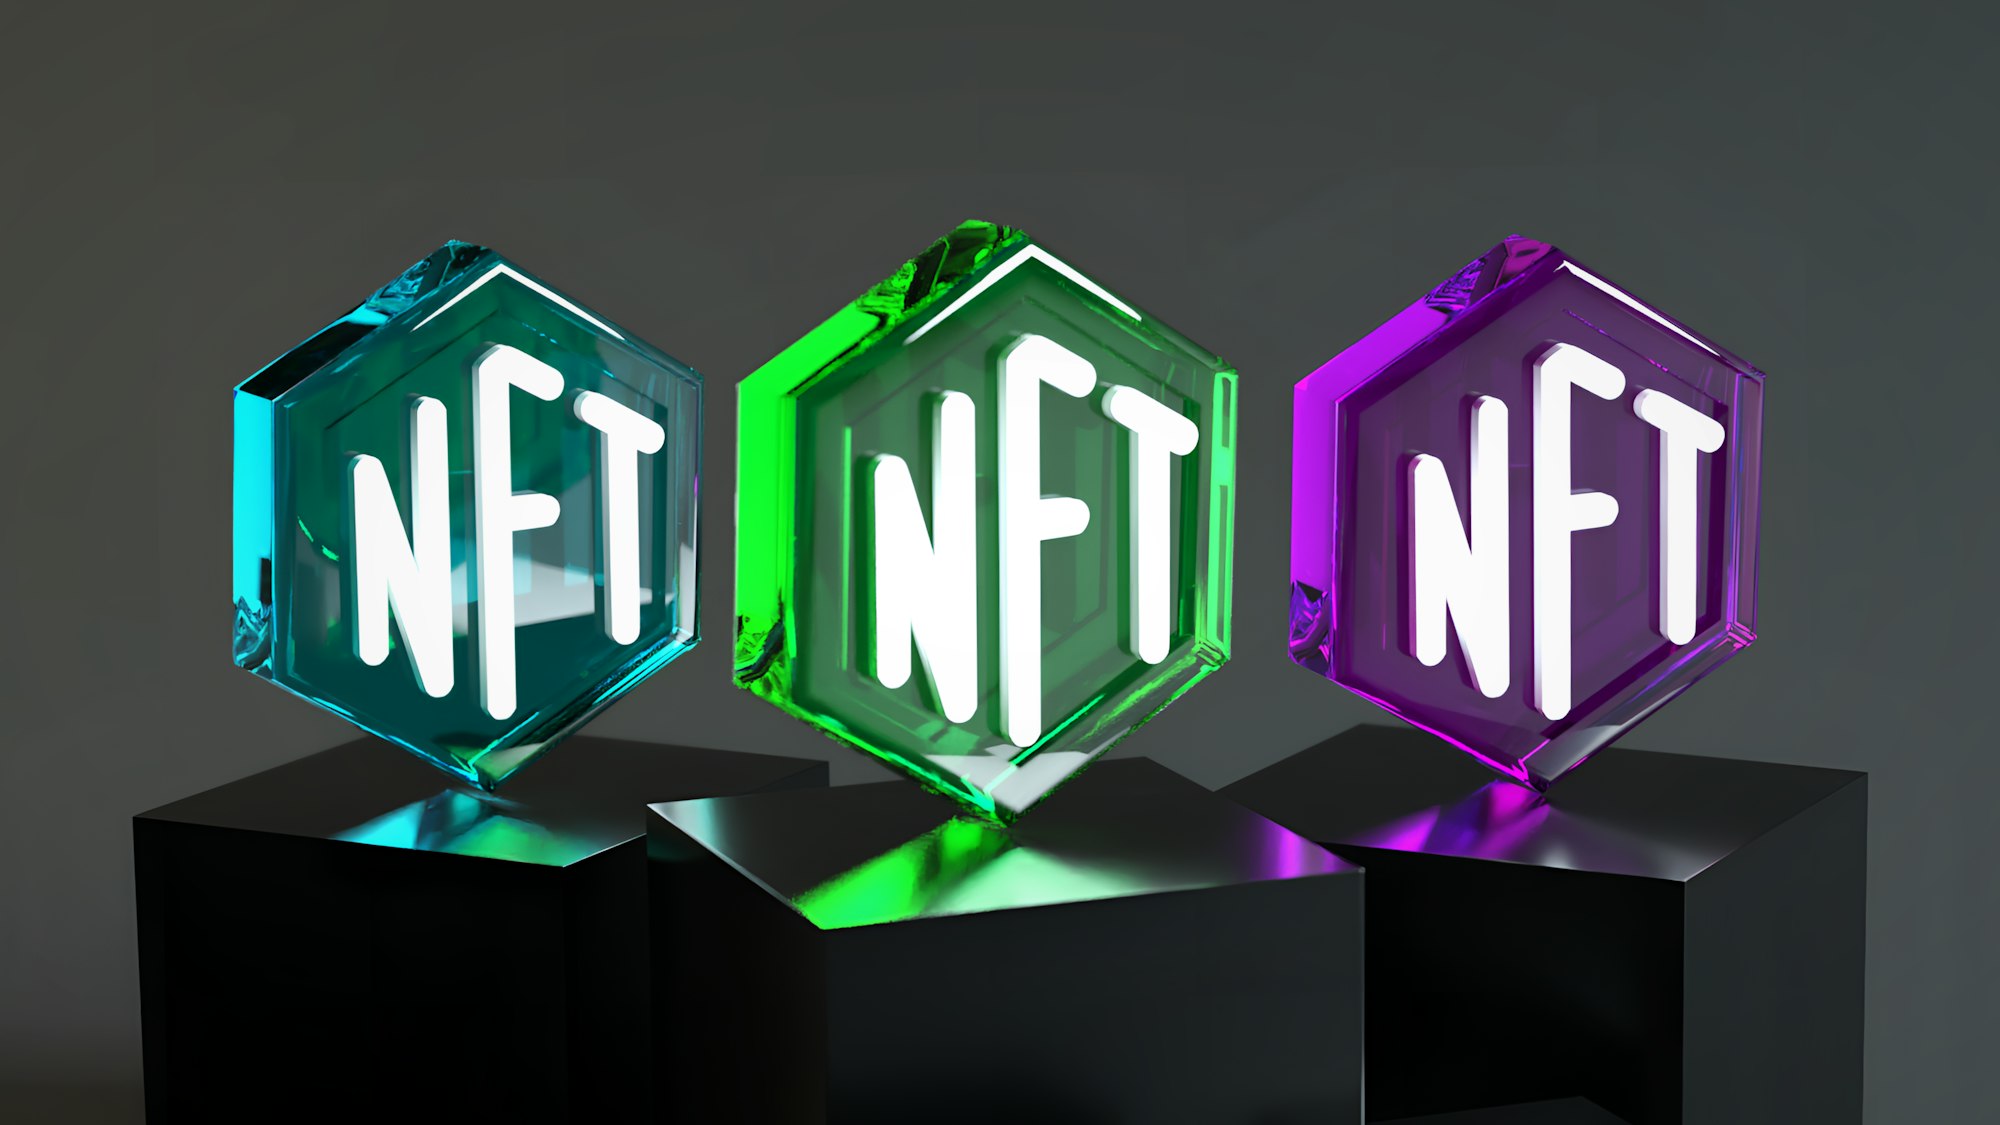 Beyond pfps: The many utilities of NFTs